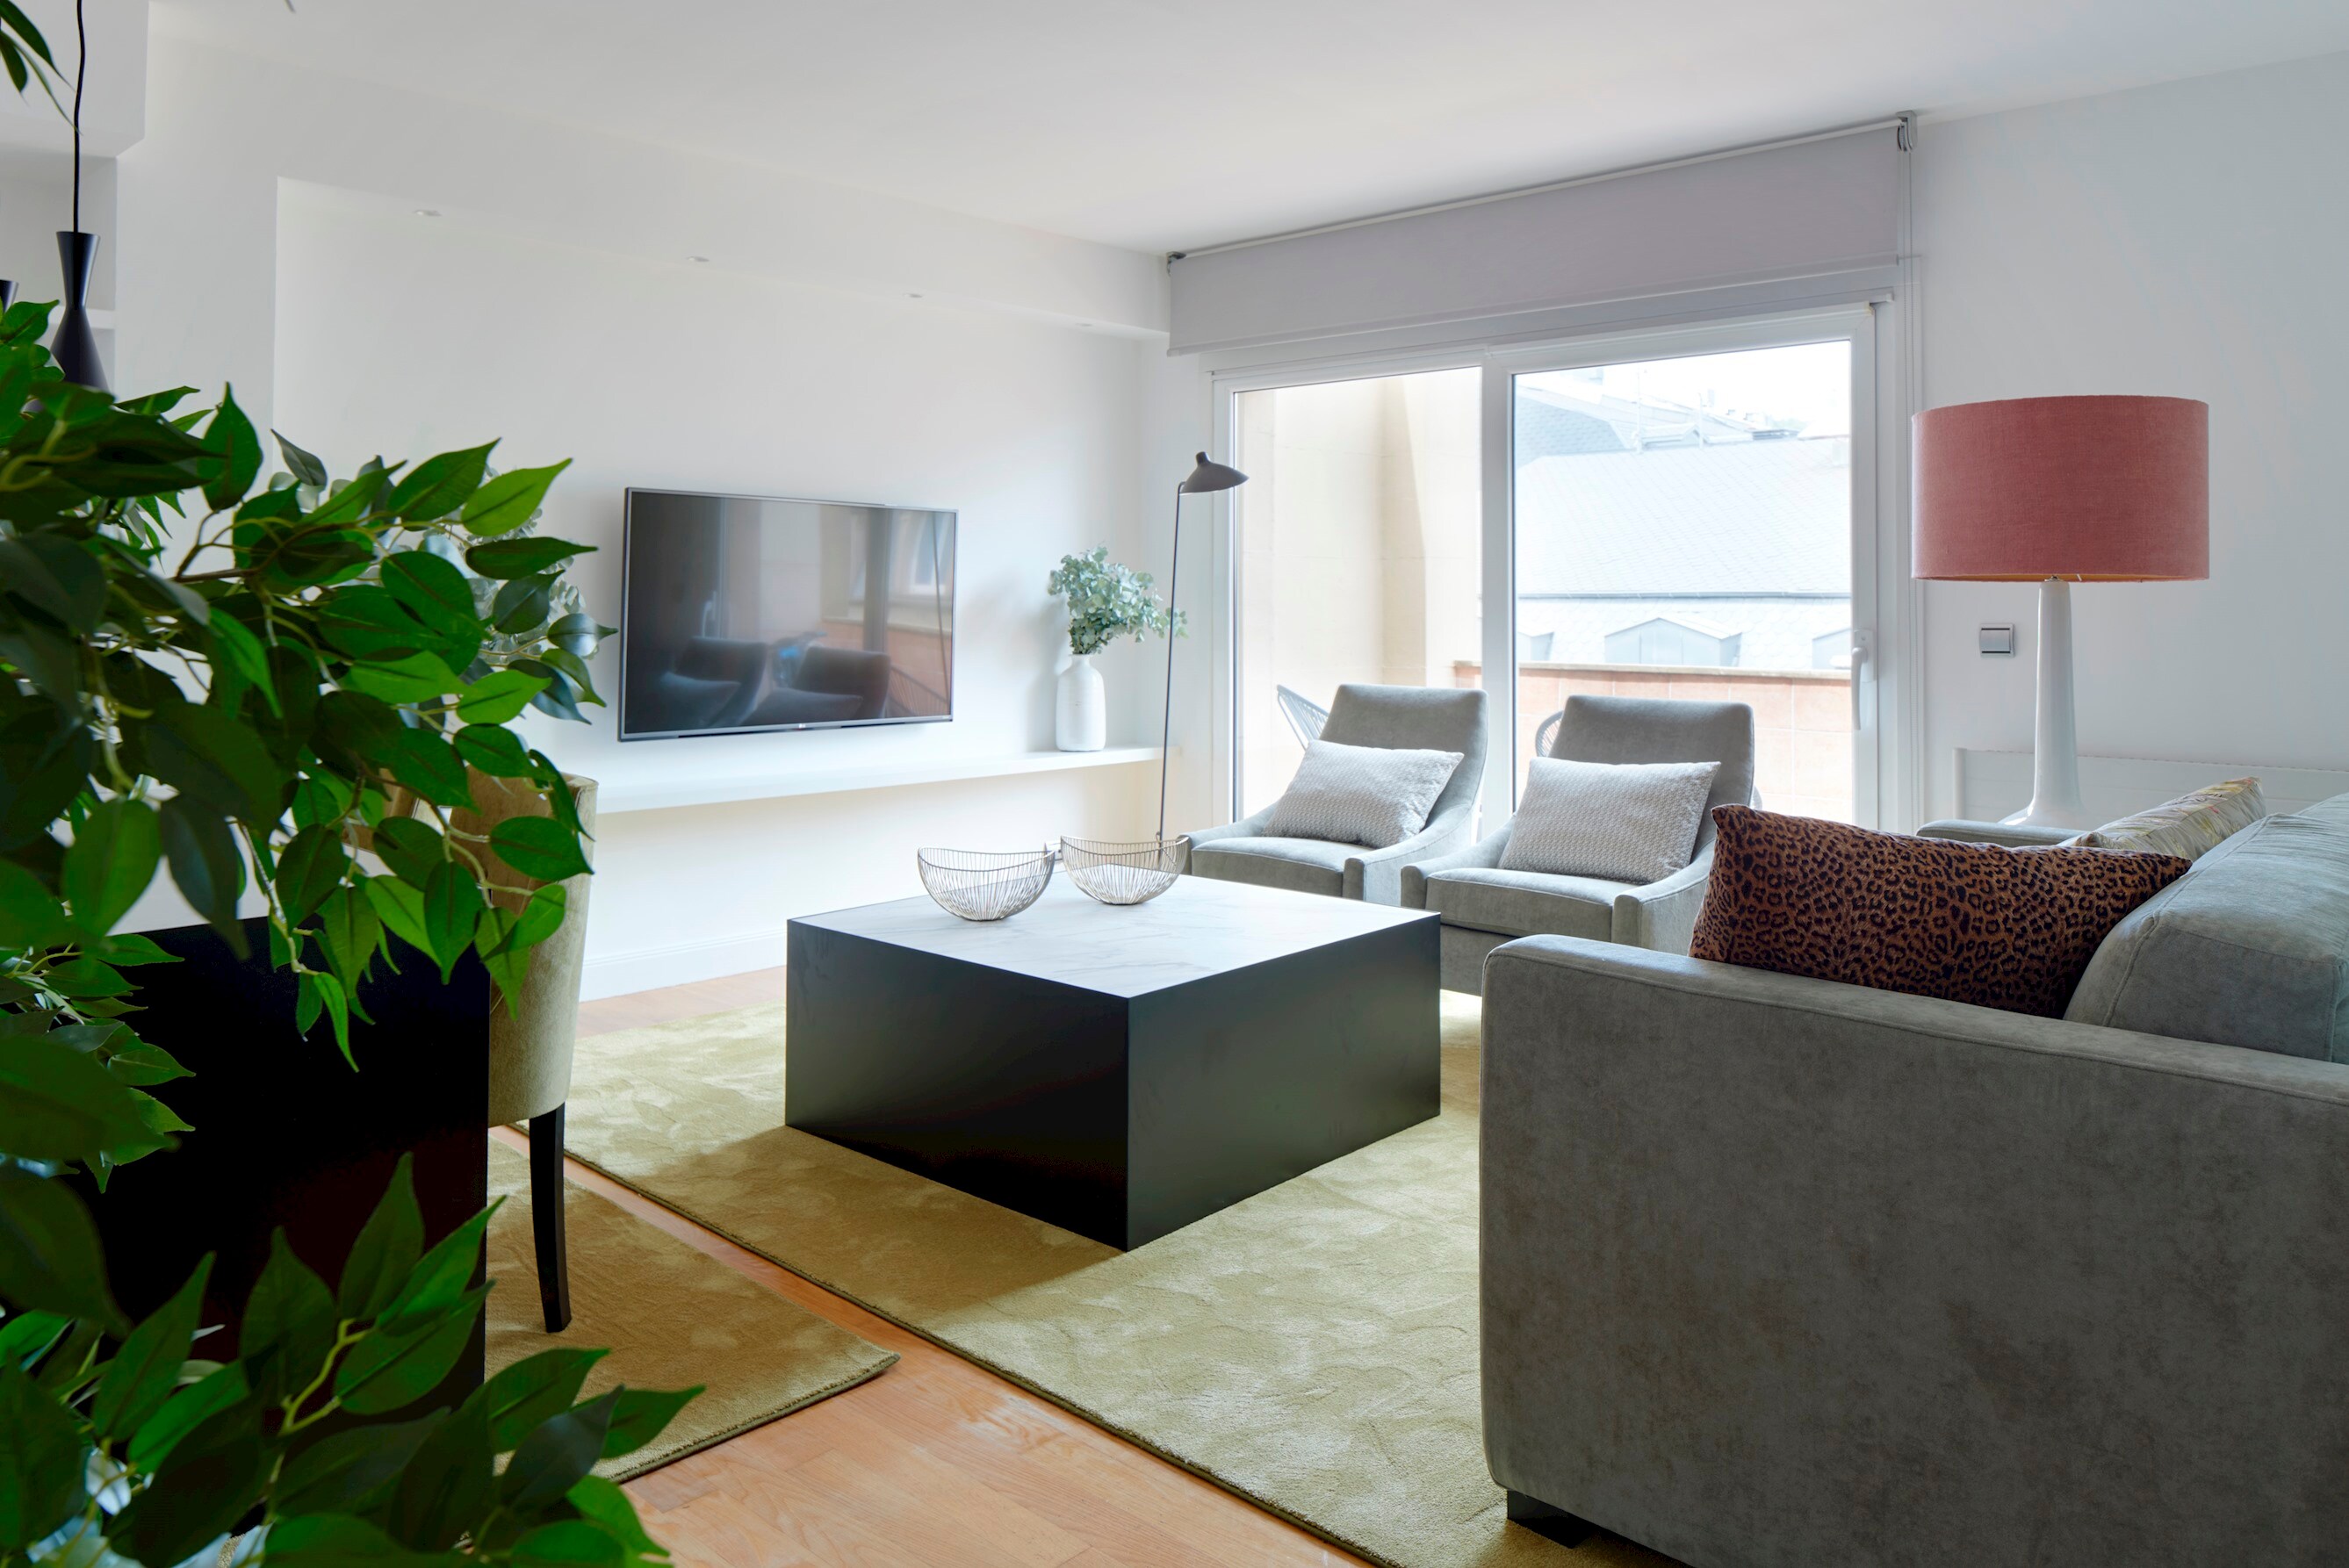 Property Image 2 - Modern Upscale Flat in the City Center with Balcony